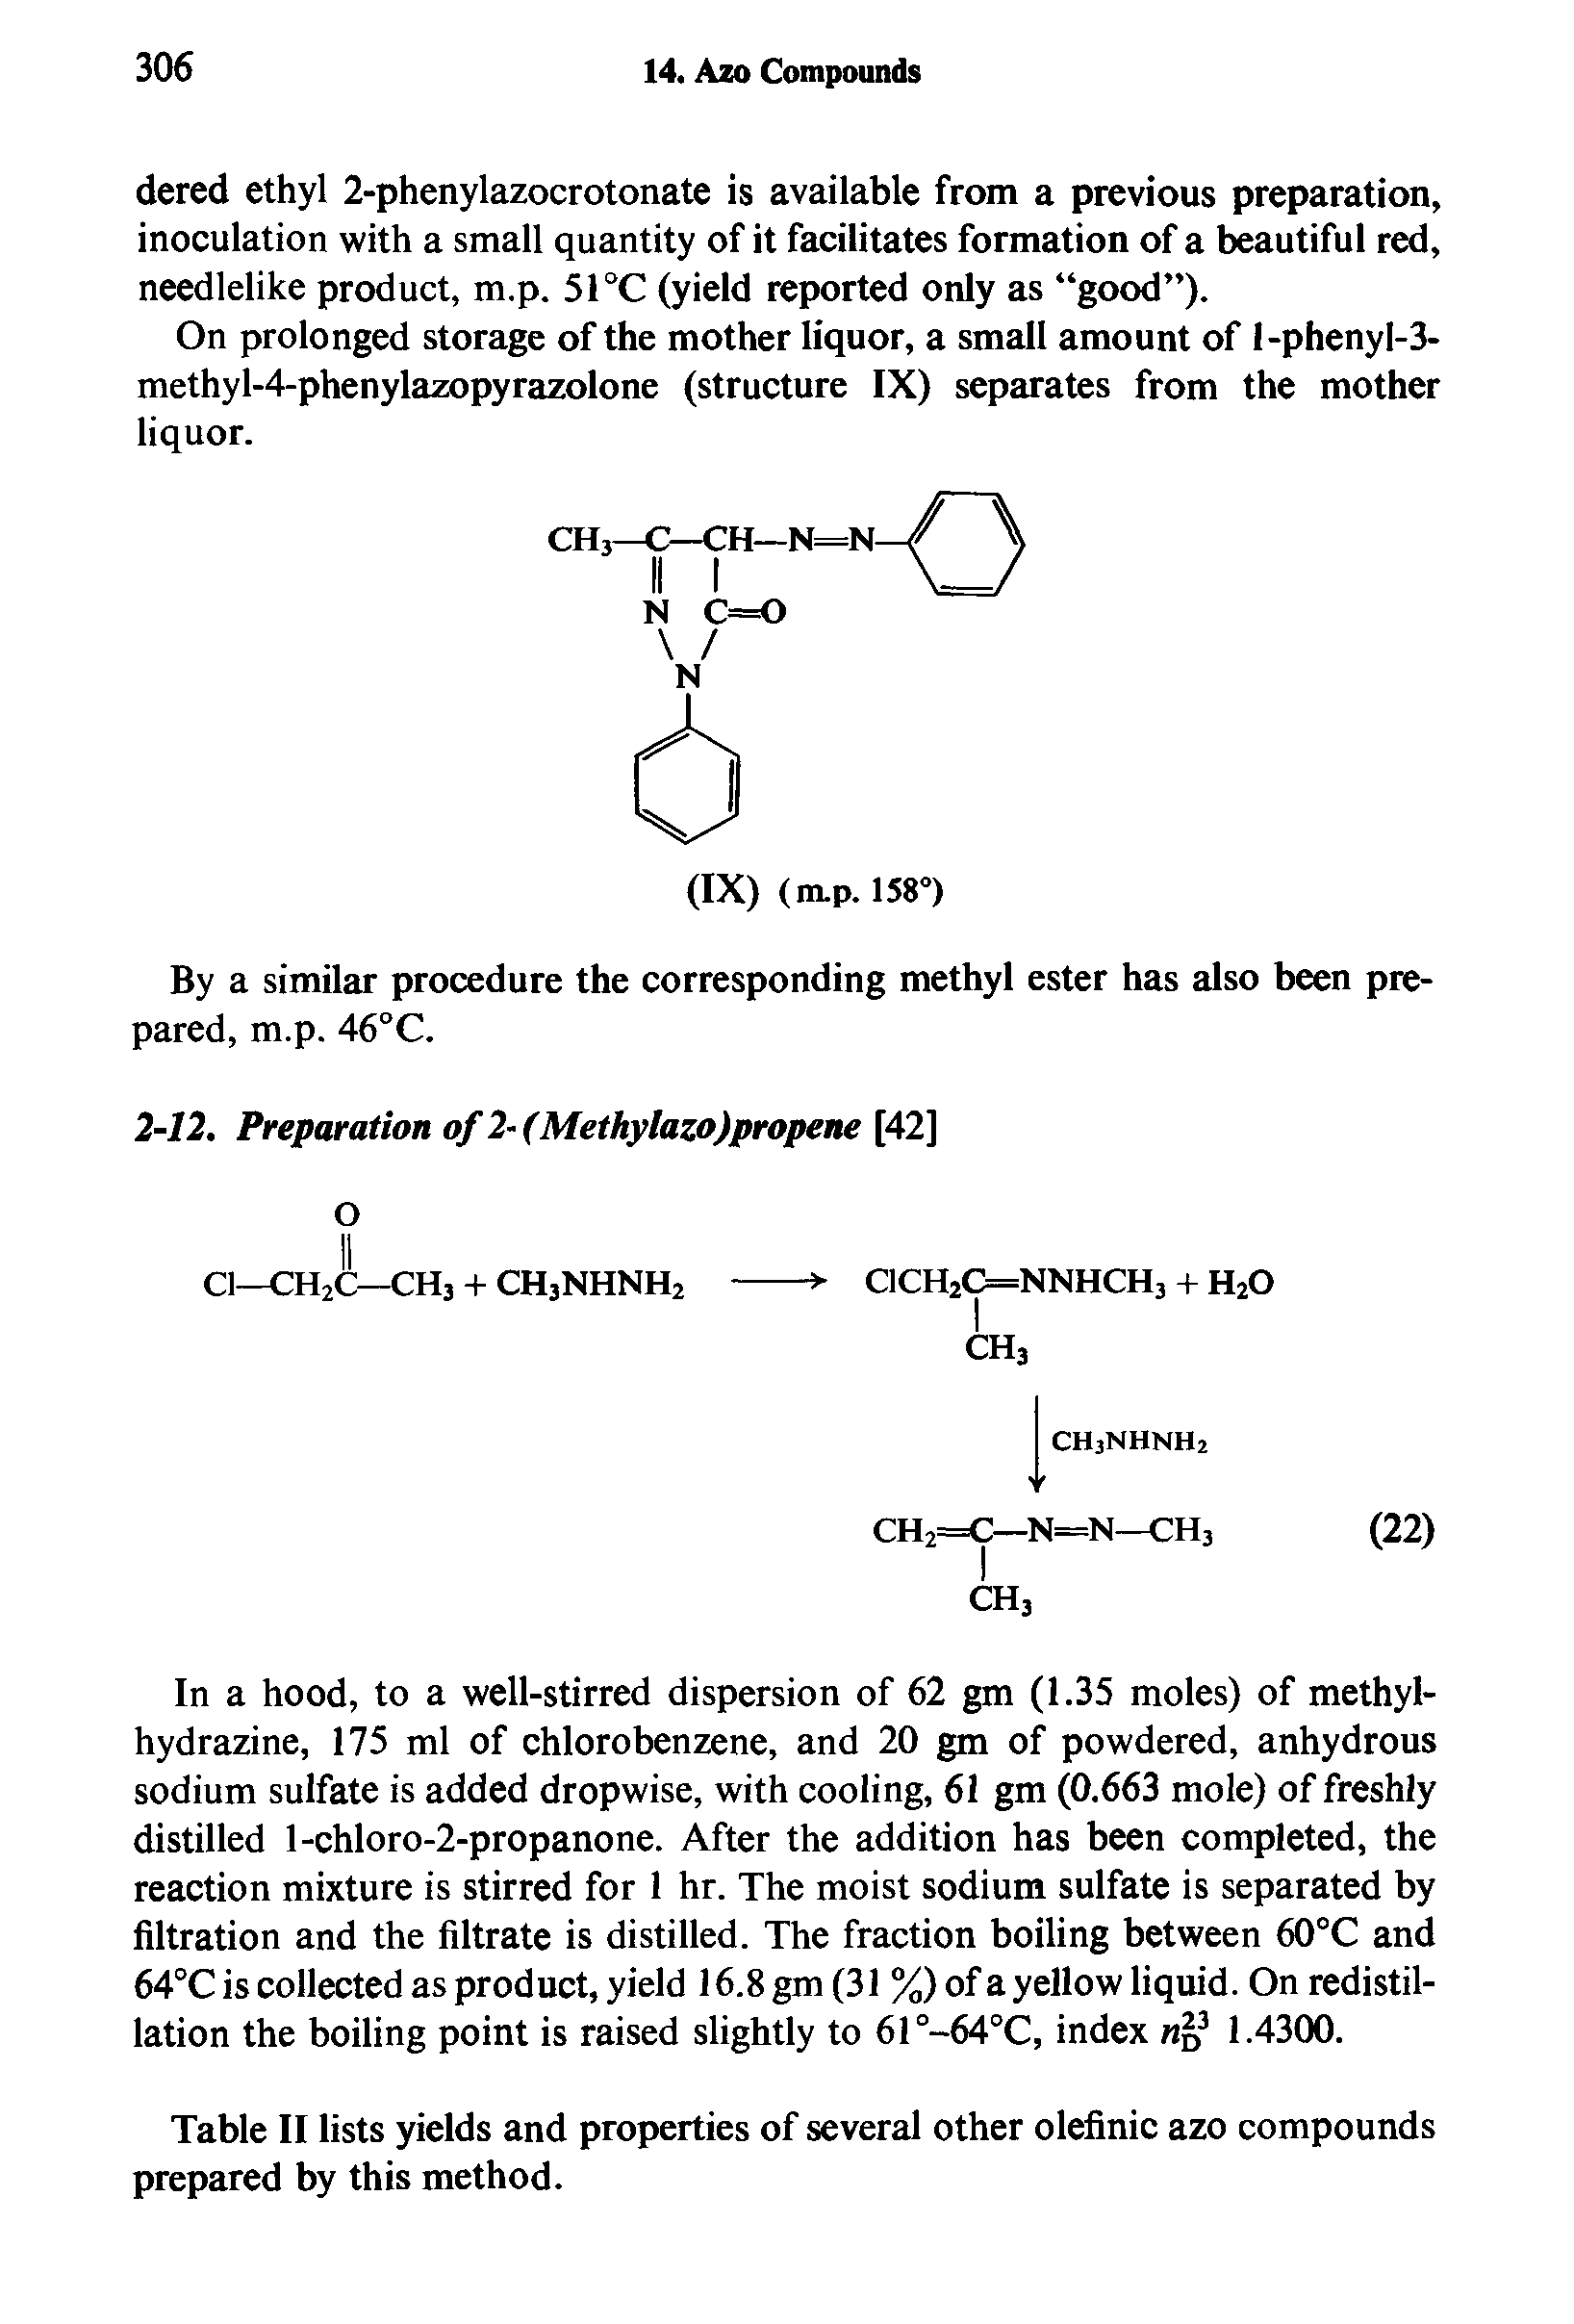 Table II lists yields and properties of several other olefinic azo compounds prepared by this method.